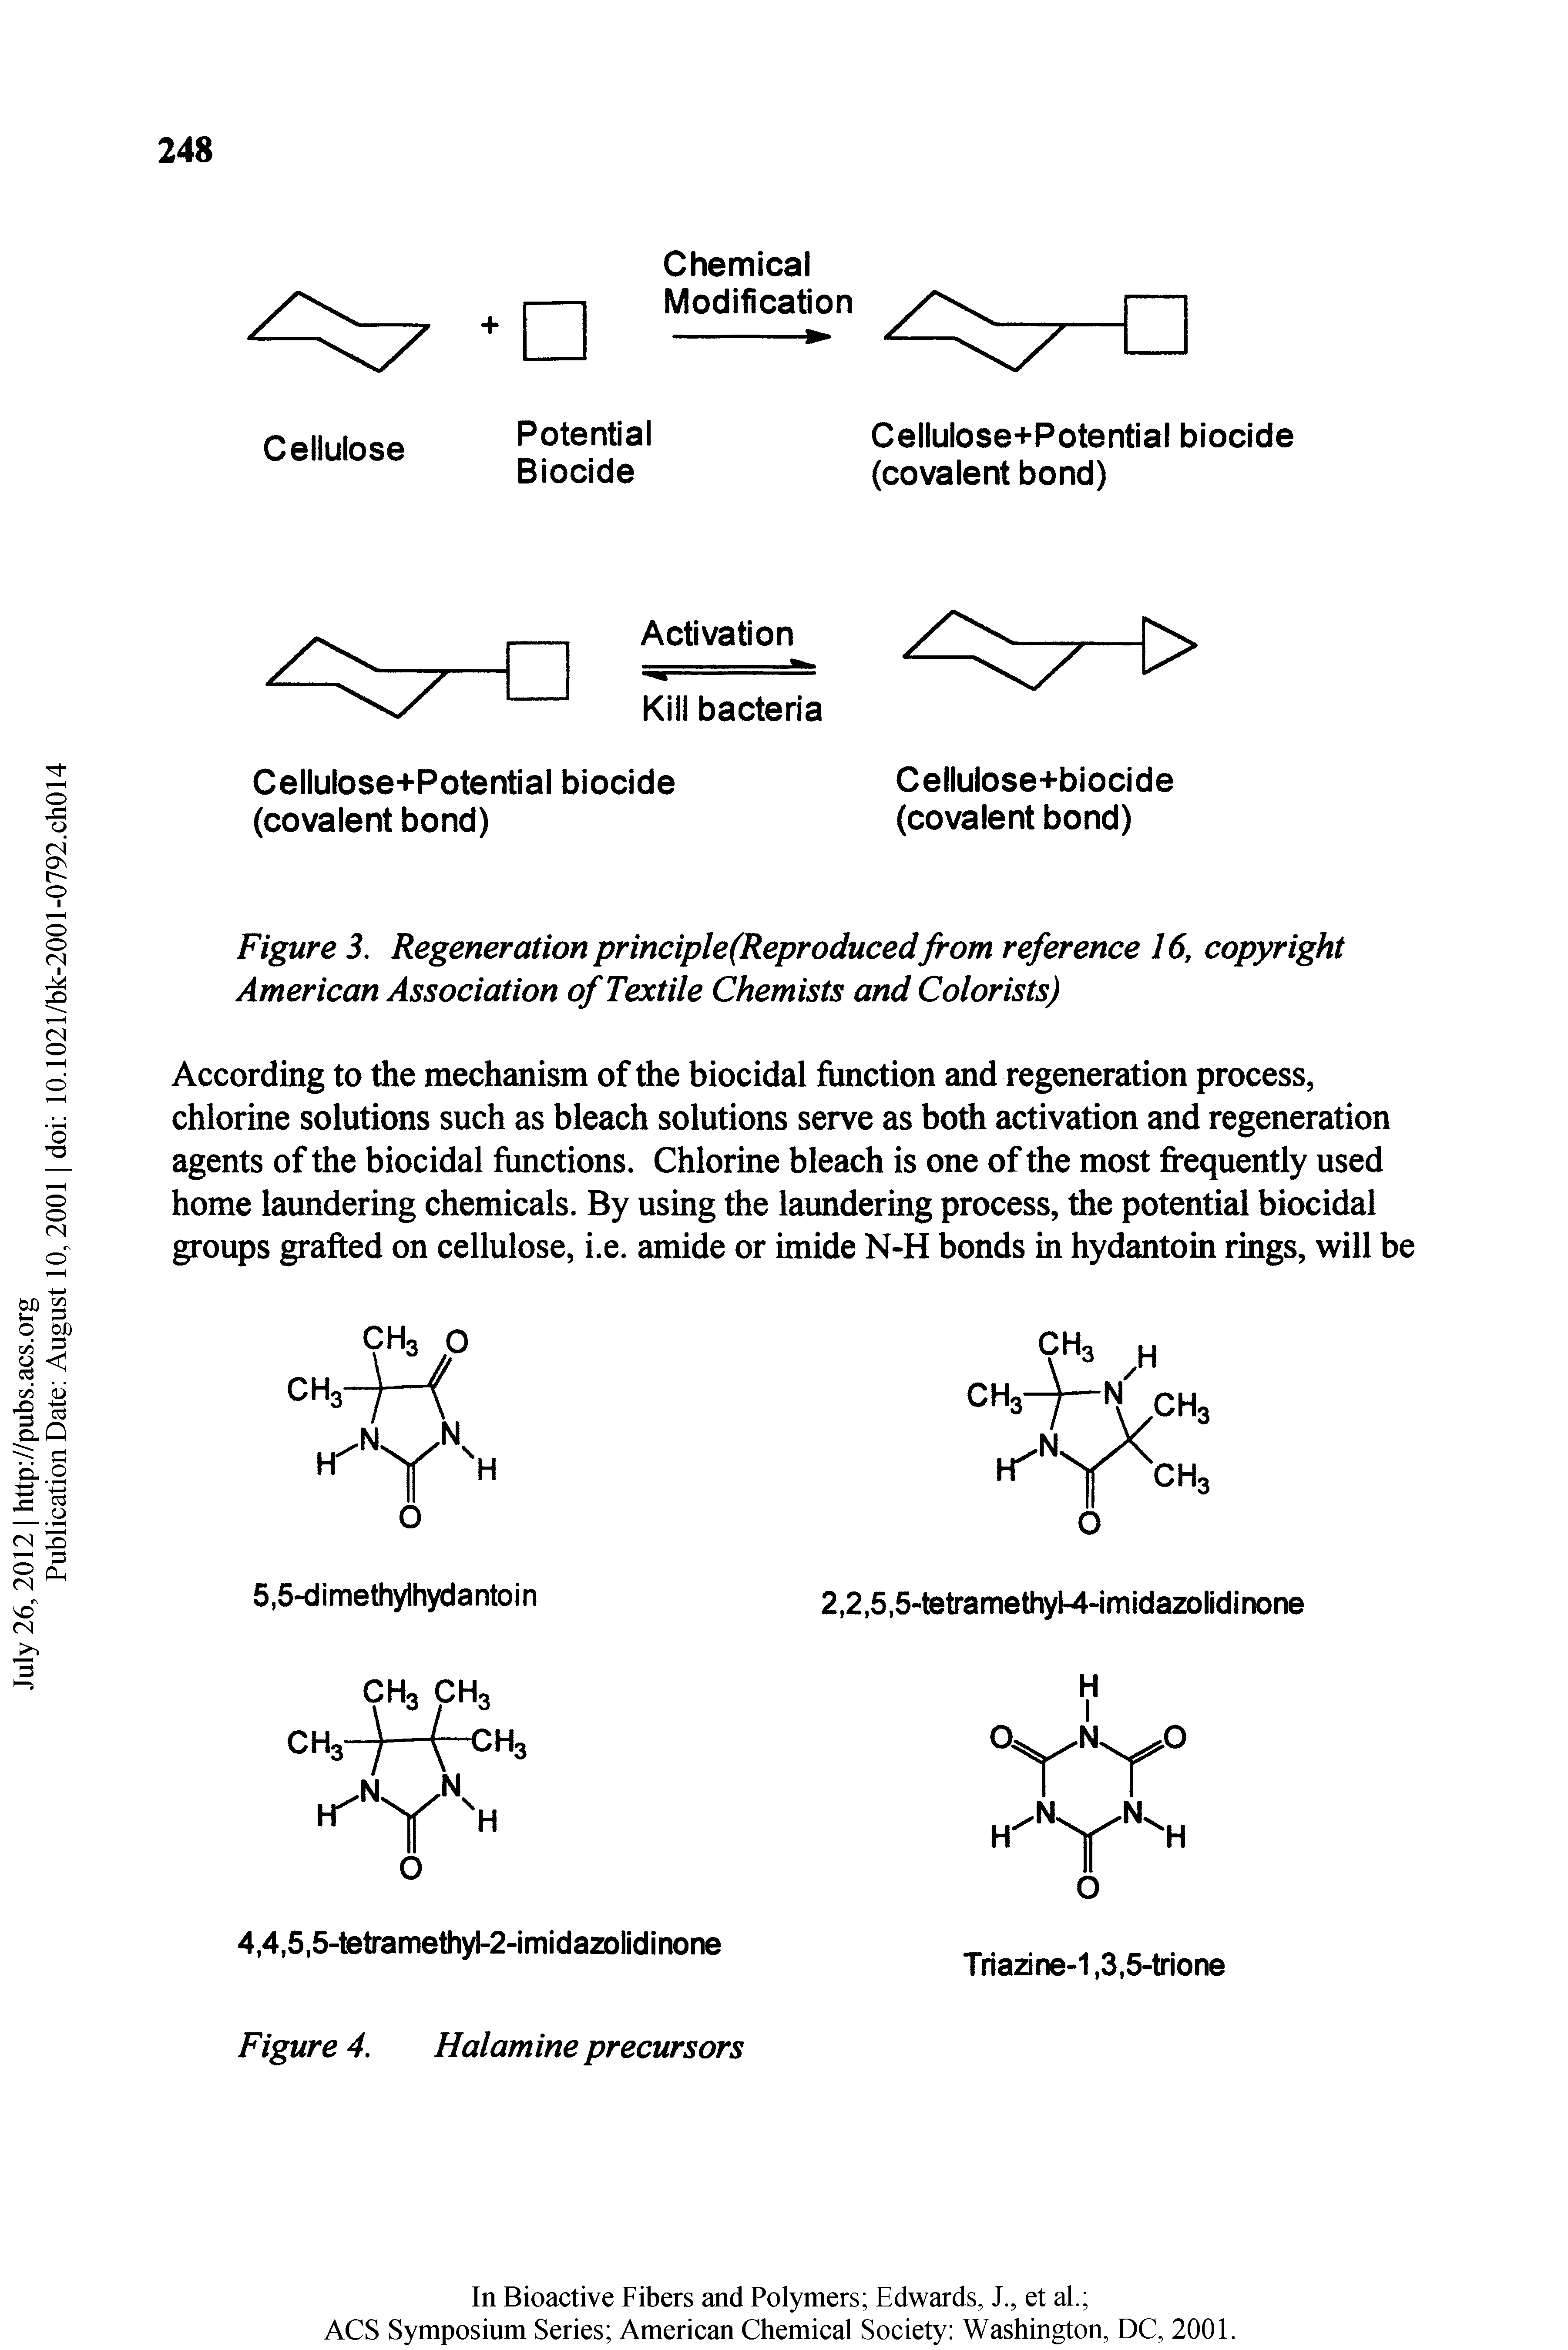 Figure 3. Regeneration principle(Reproducedfrom reference 16, copyright American Association of Textile Chemists and Colorists)...